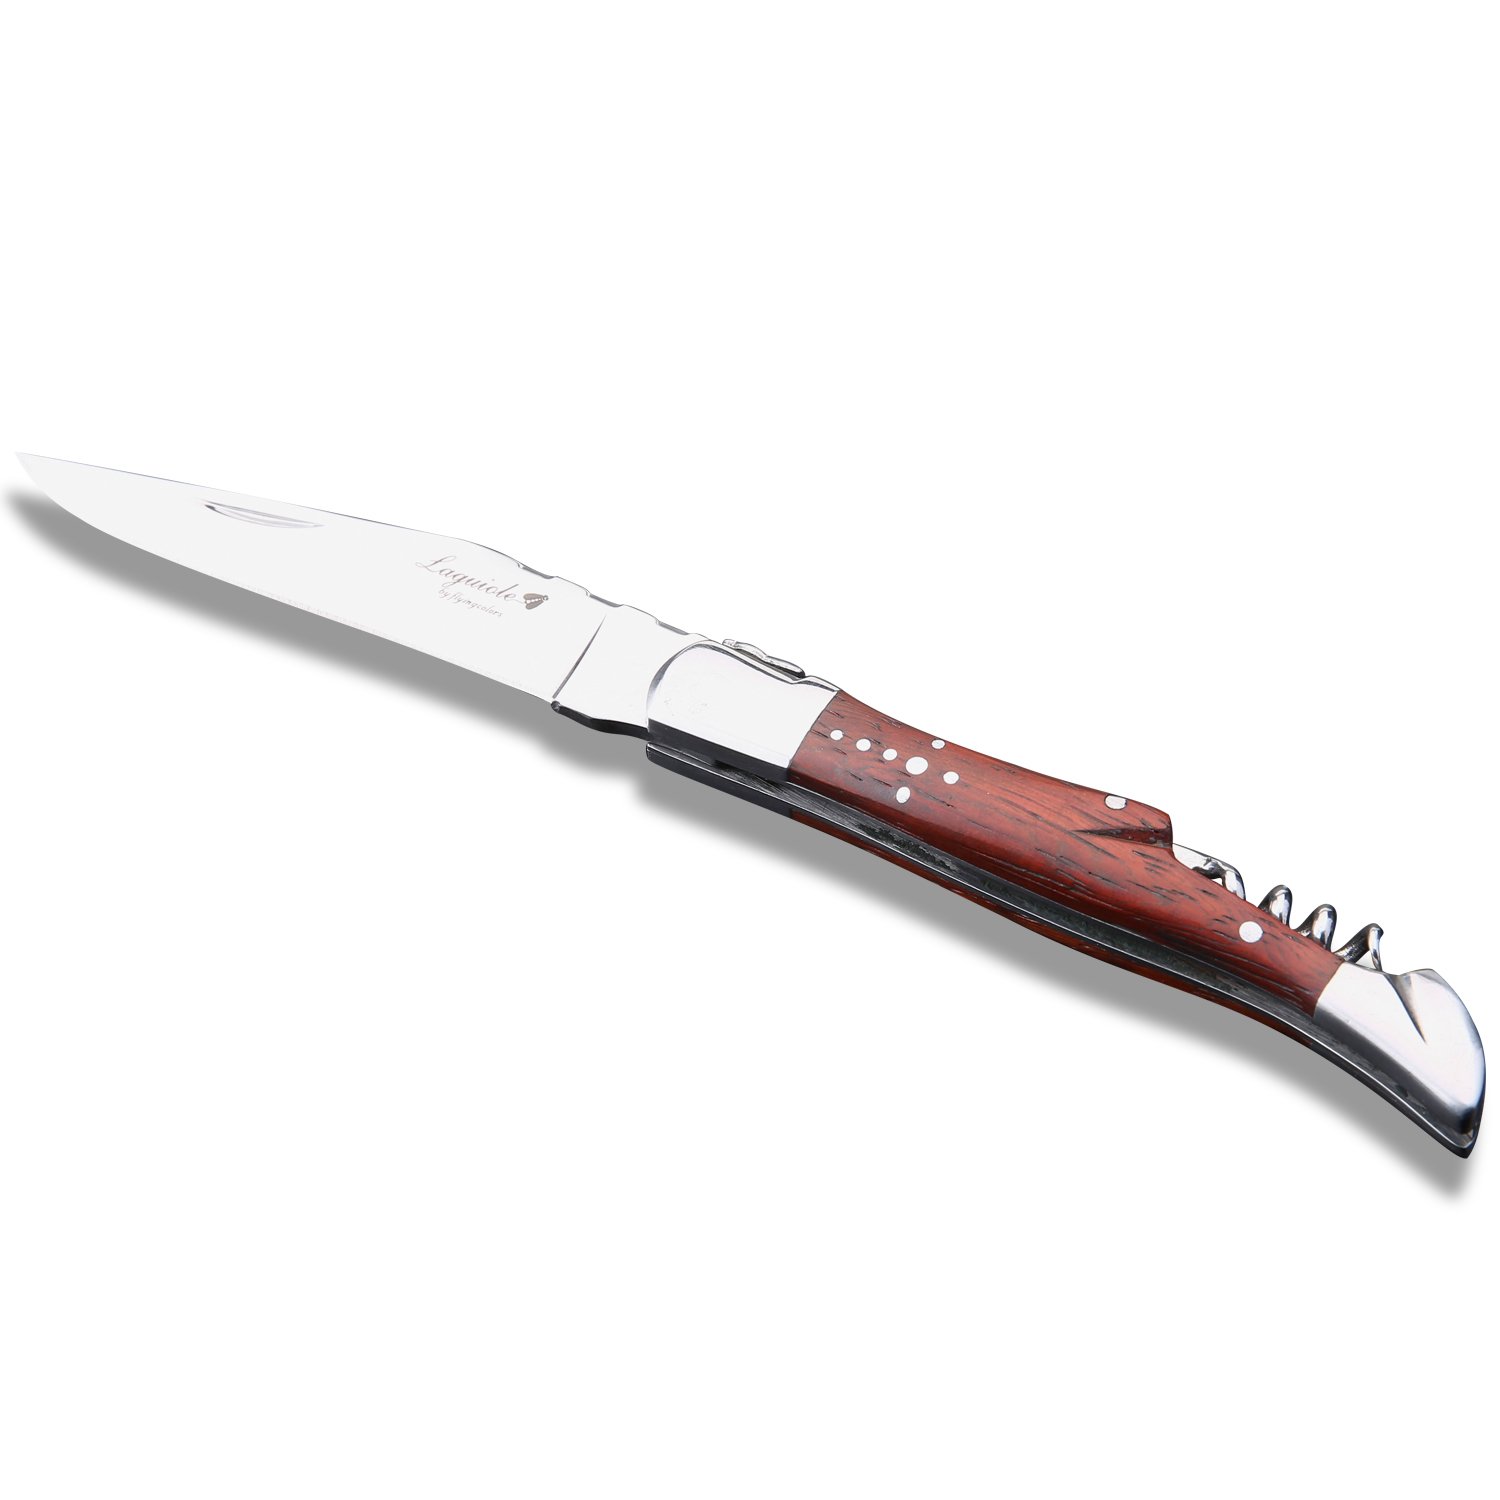 LAGUIOLE BY FLYINGCOLORS Folding Pocket Knife. Stainless Steel, Built in Corkscrew. (Wood)